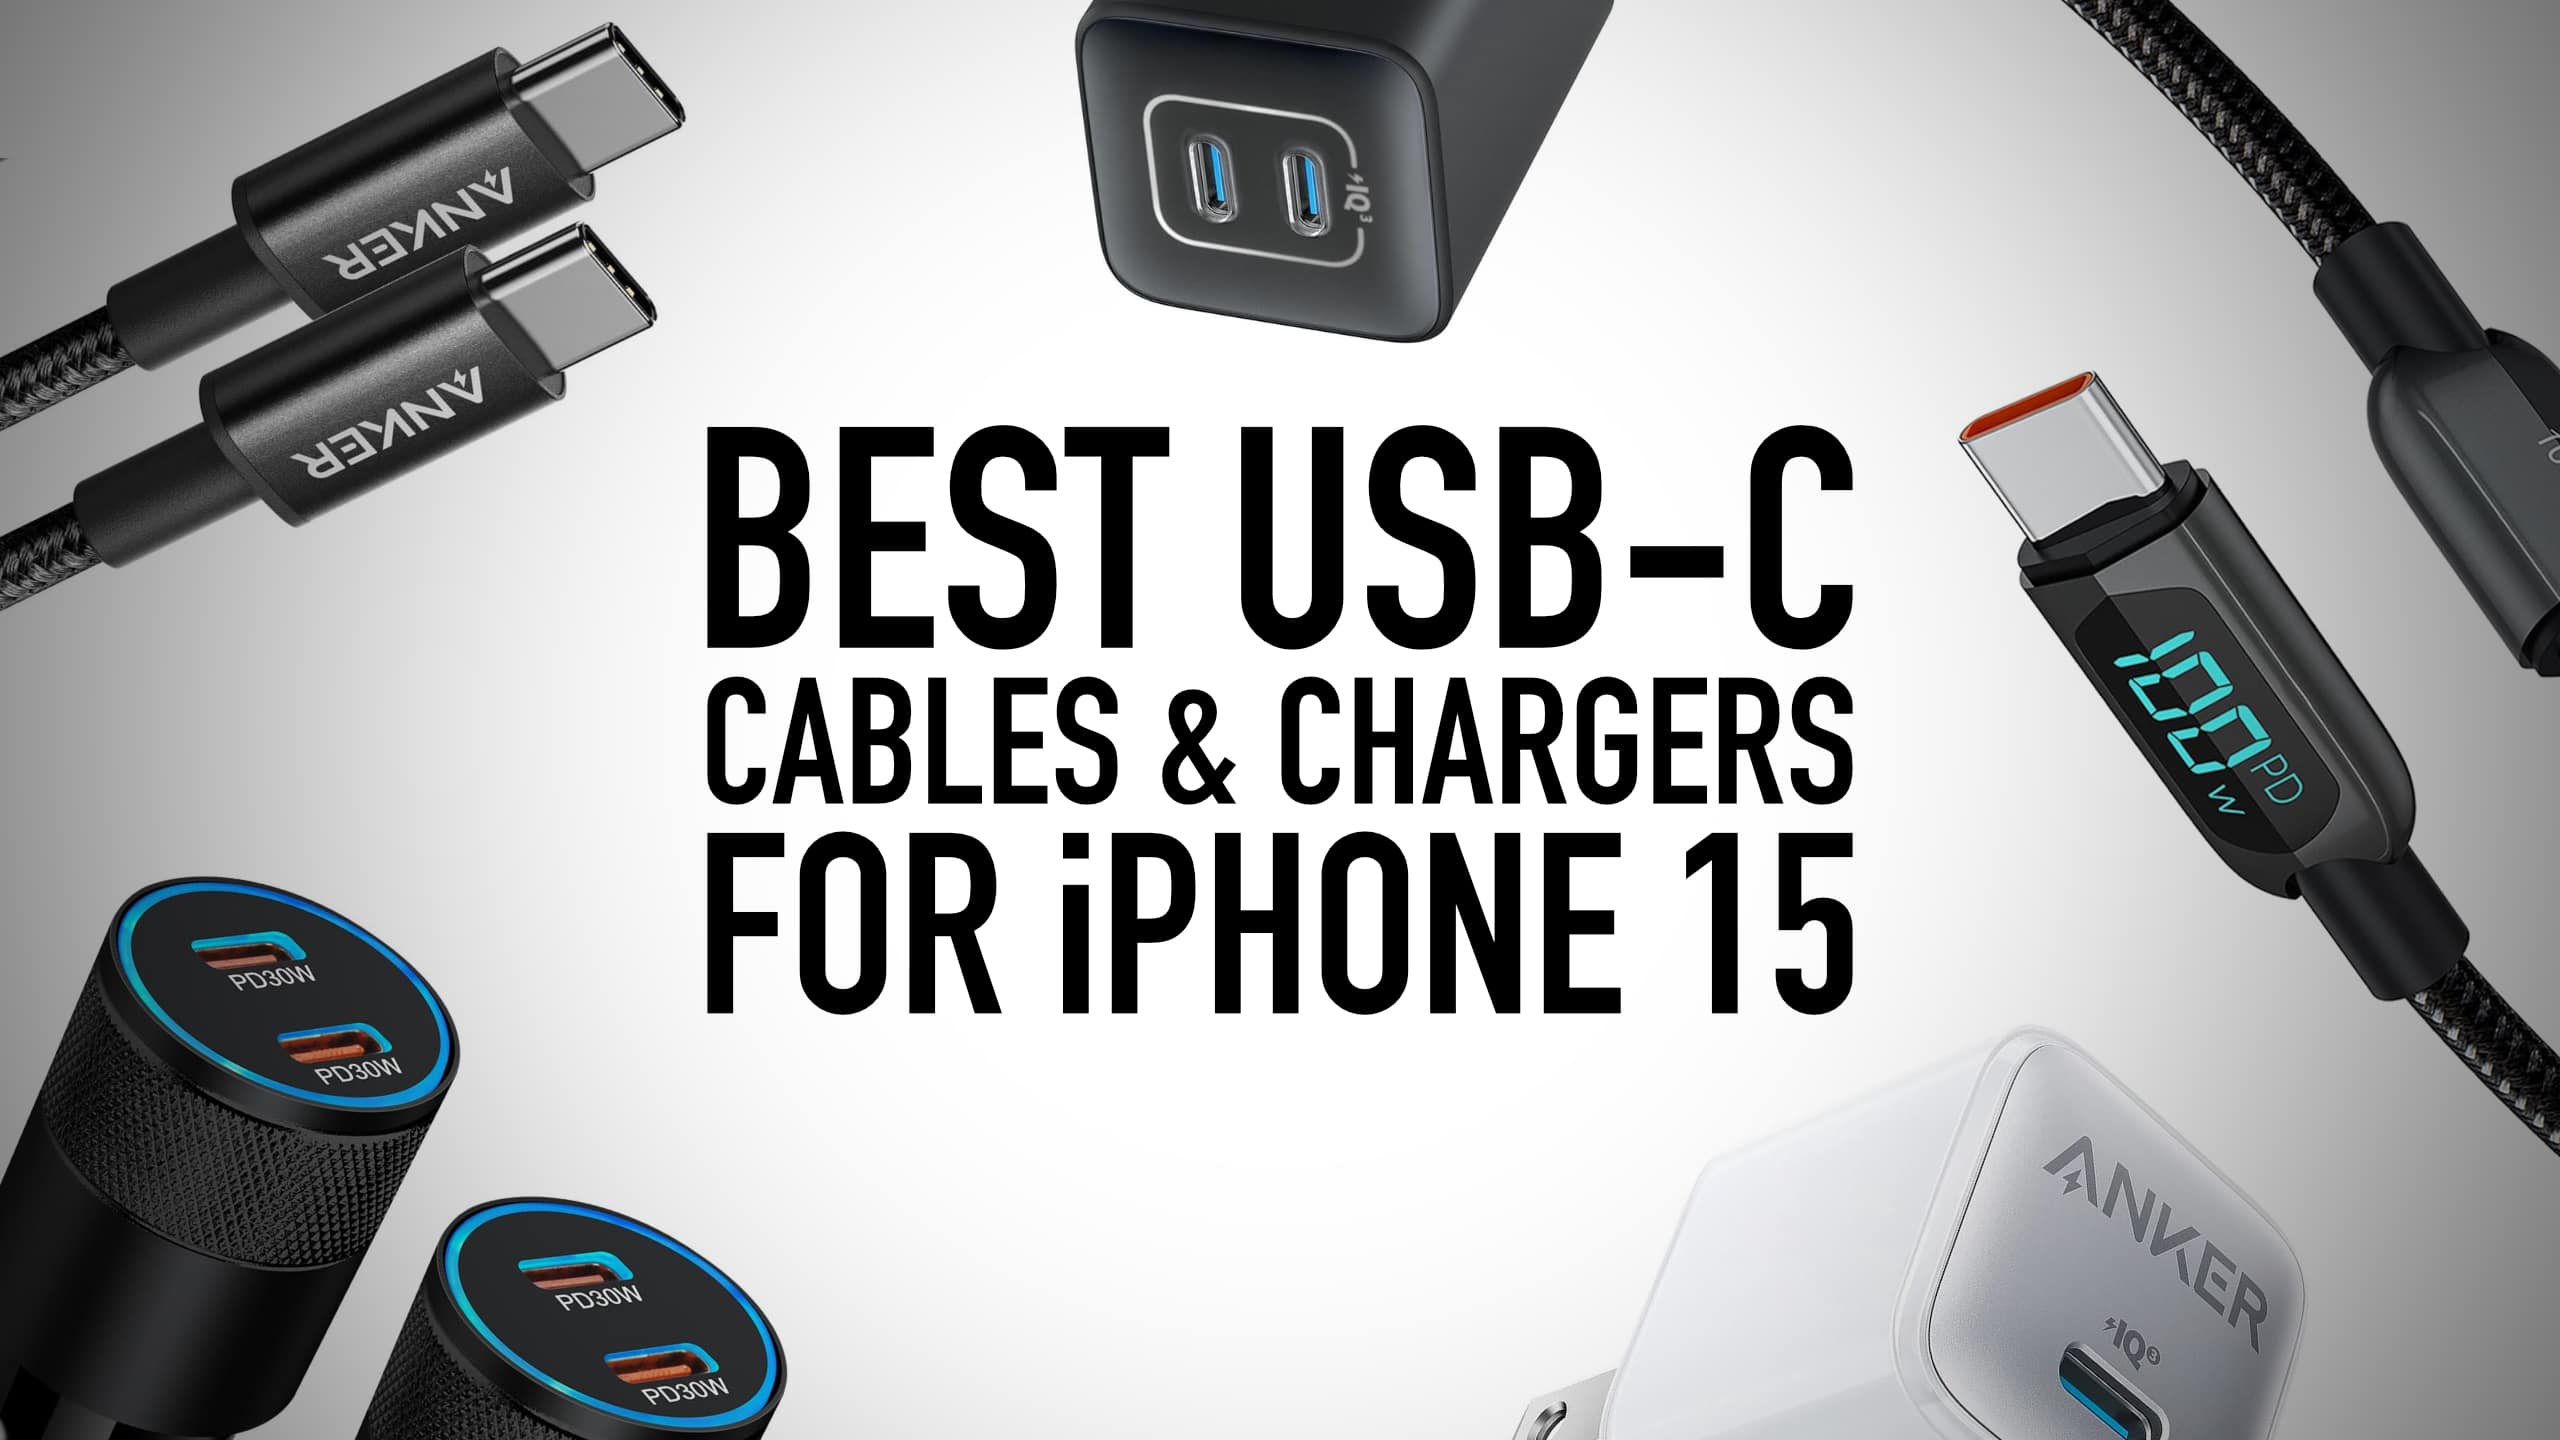 Best USB-C cables and chargers for iPhone 15